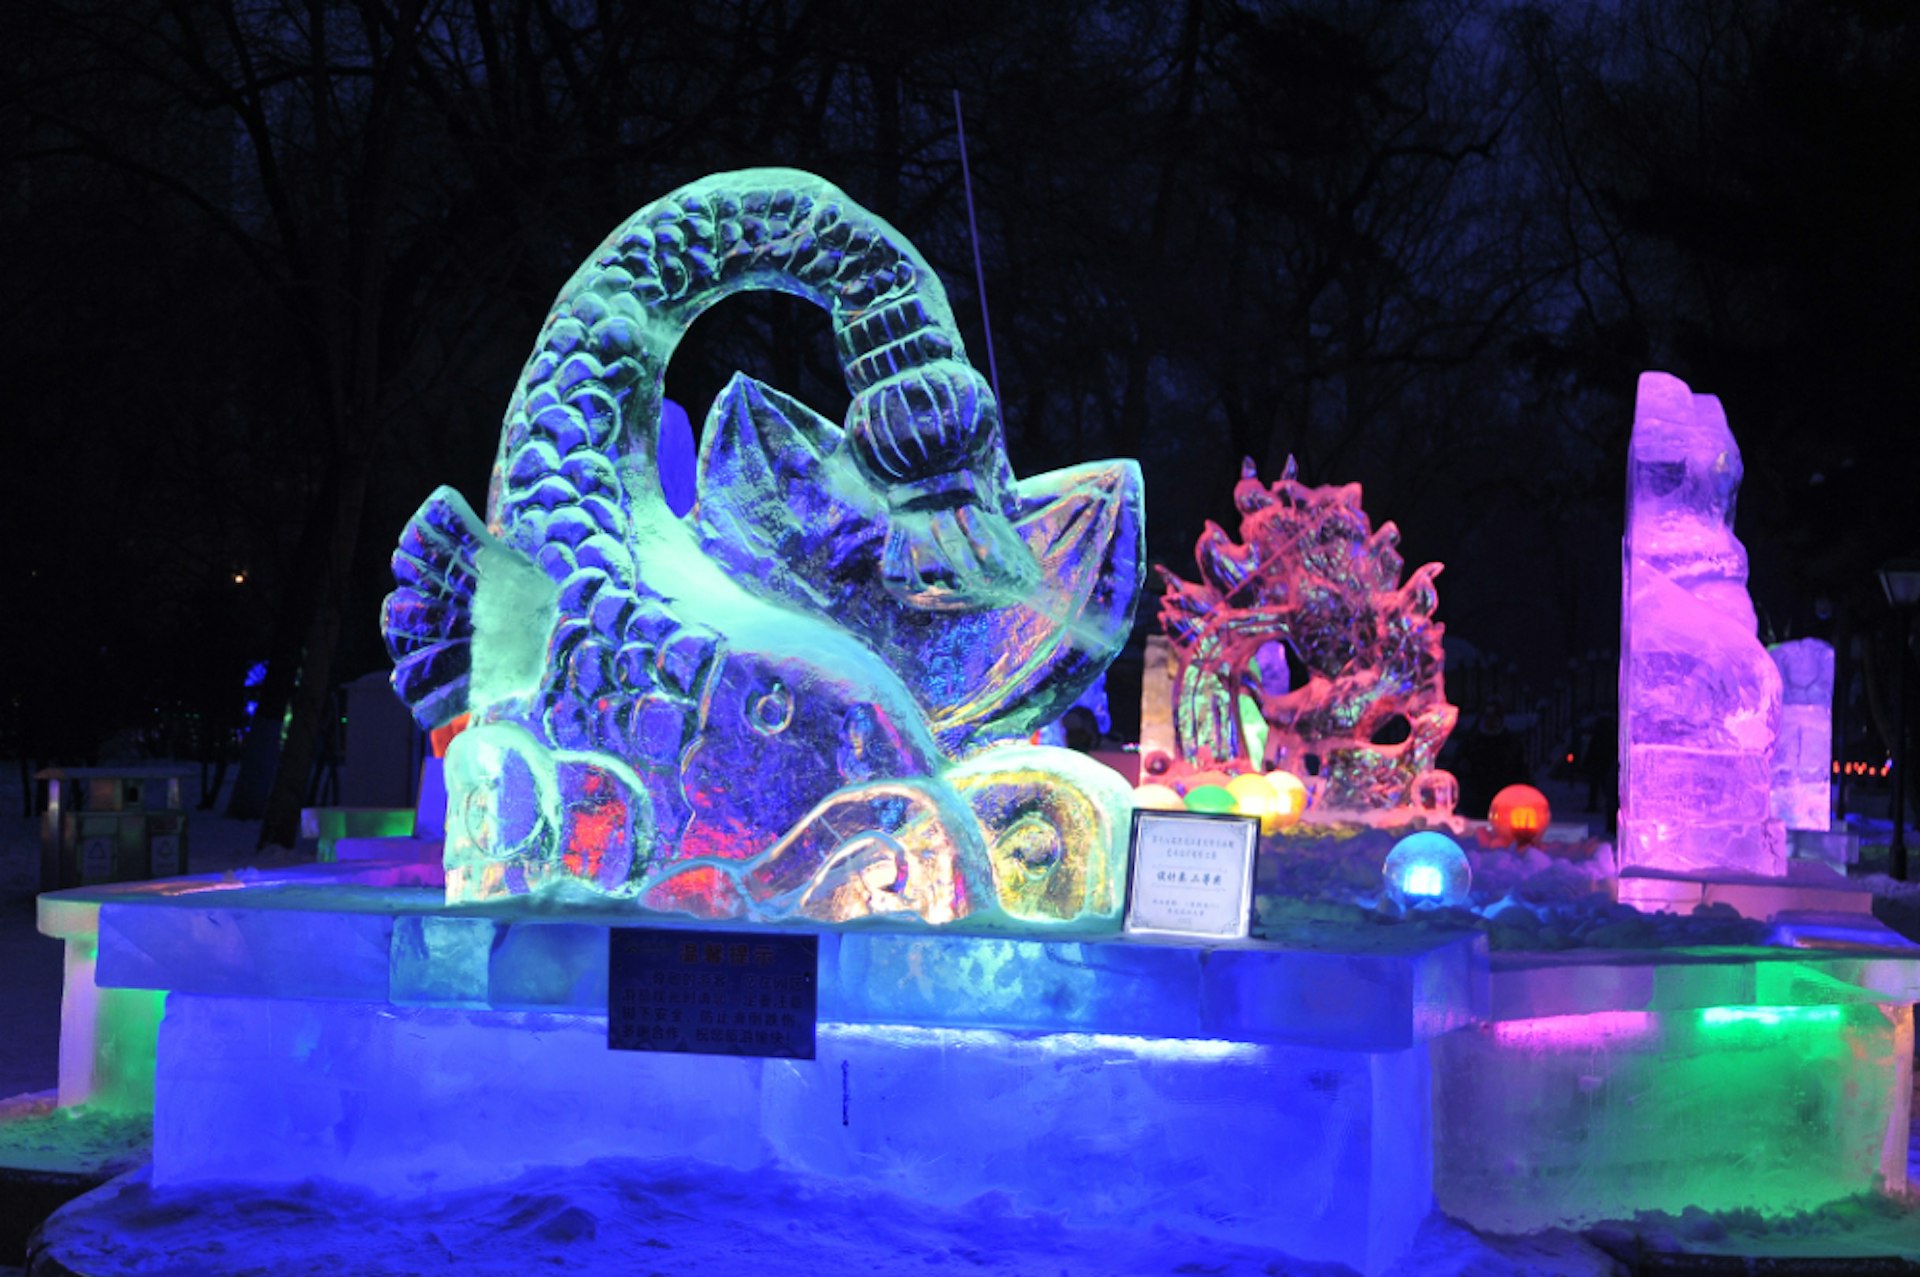 Illuminated ice sculptures at the Harbin Snow and Ice Festival in China